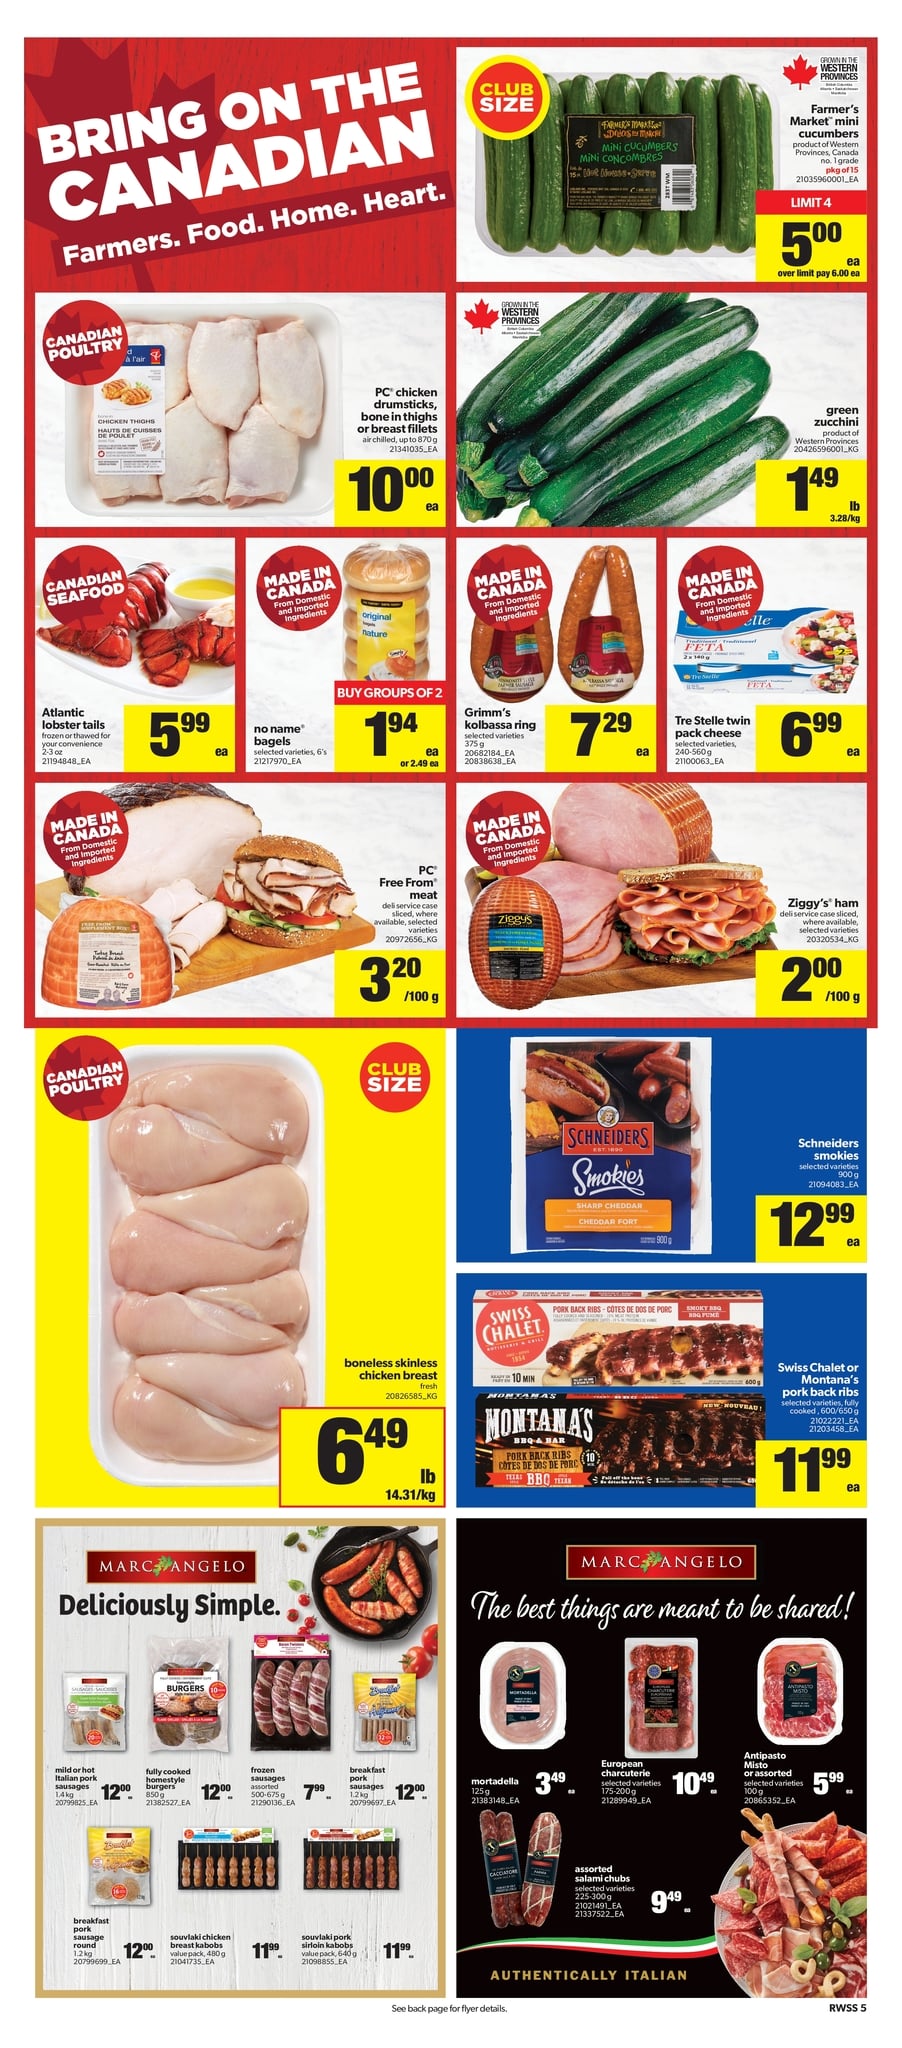 Real Canadian Superstore Western Canada - Weekly Flyer Specials - Page 5